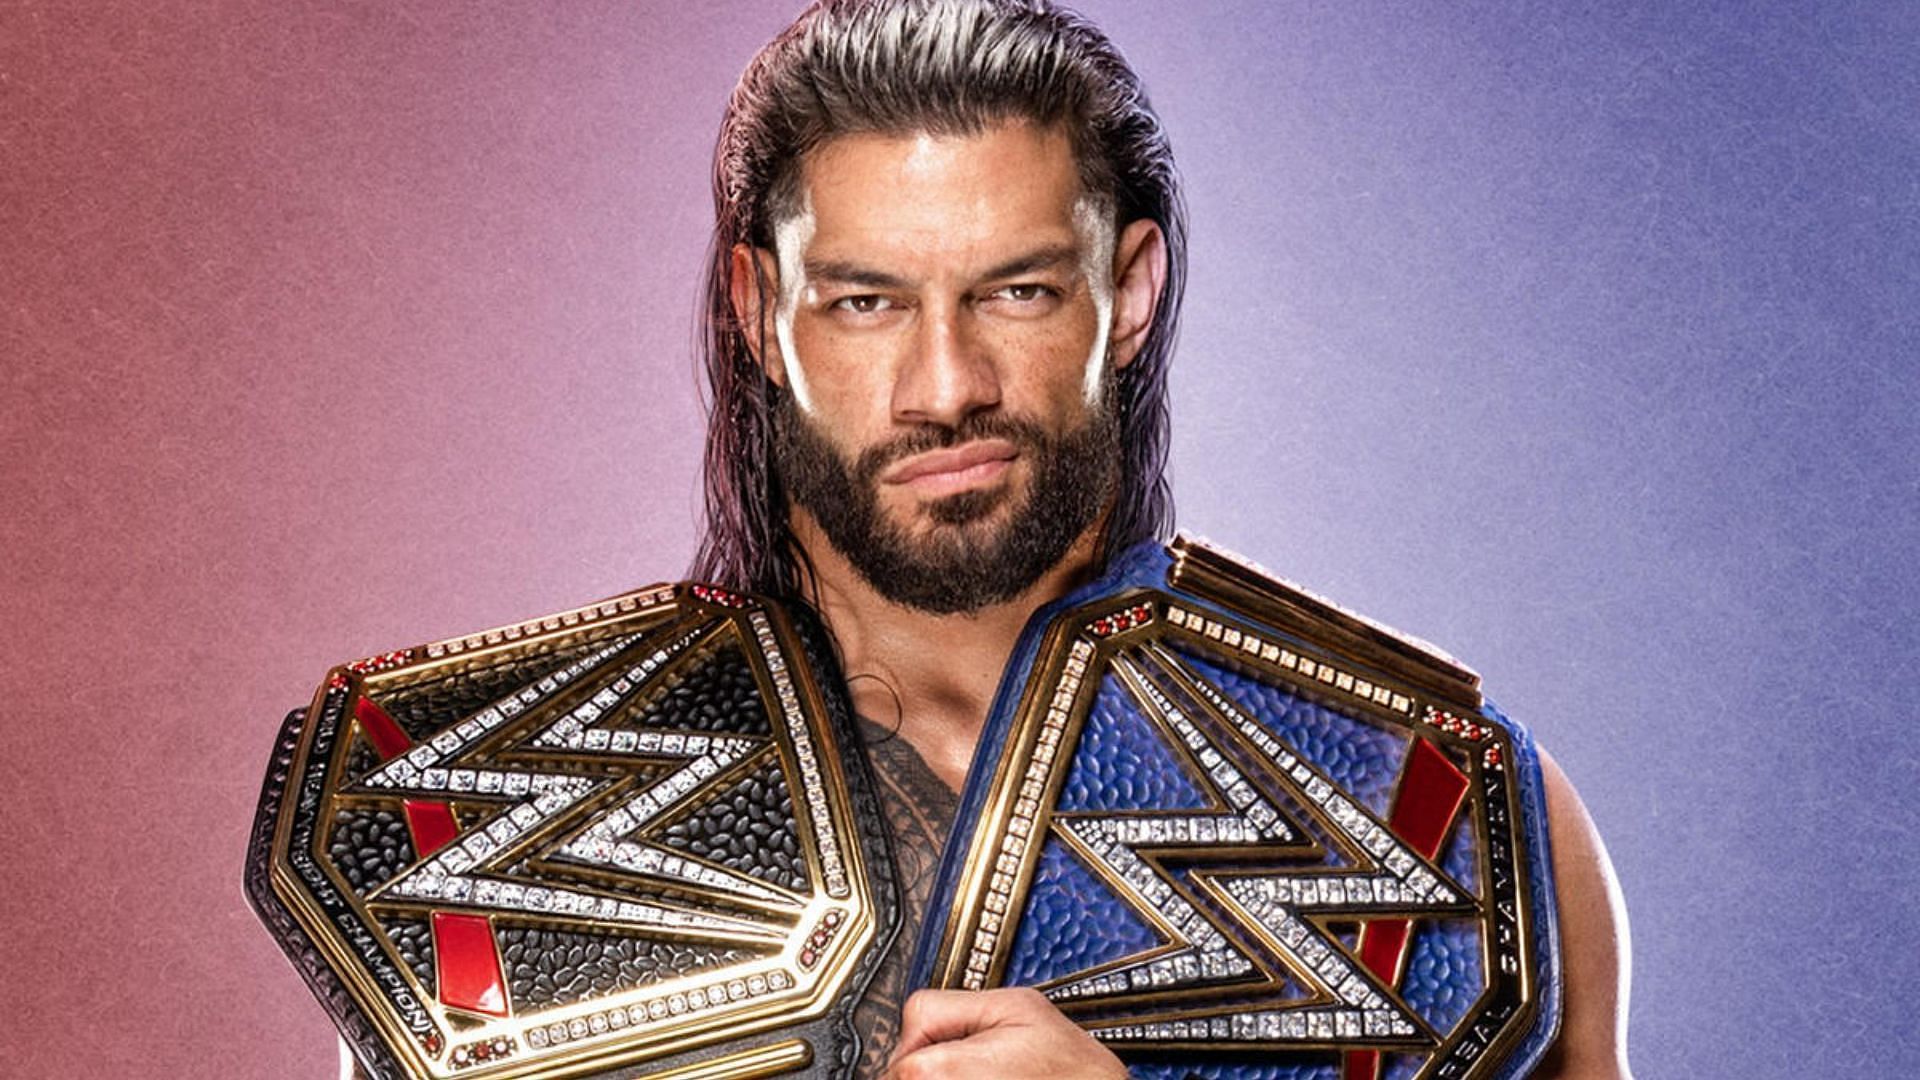 Roman Reigns holds the Universal and WWE Championships